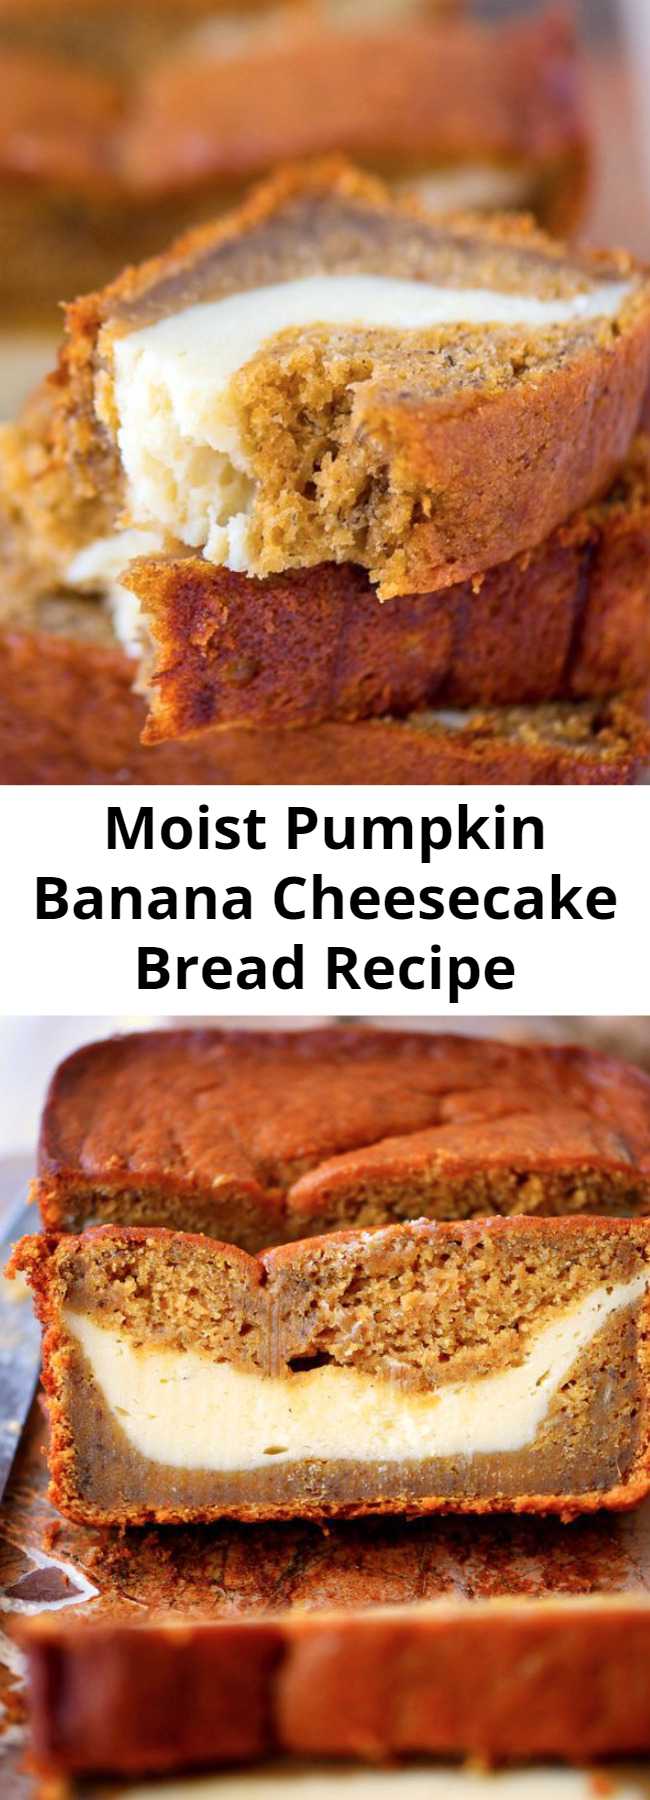 Moist Pumpkin Banana Cheesecake Bread Recipe - This Pumpkin Cheesecake Banana Bread is perfect for dessert but also doubles as an amazing breakfast...or snack...or lunch. It's pretty amazing no matter what time you eat it! Ultra moist and bursting with pumpkin flavor!